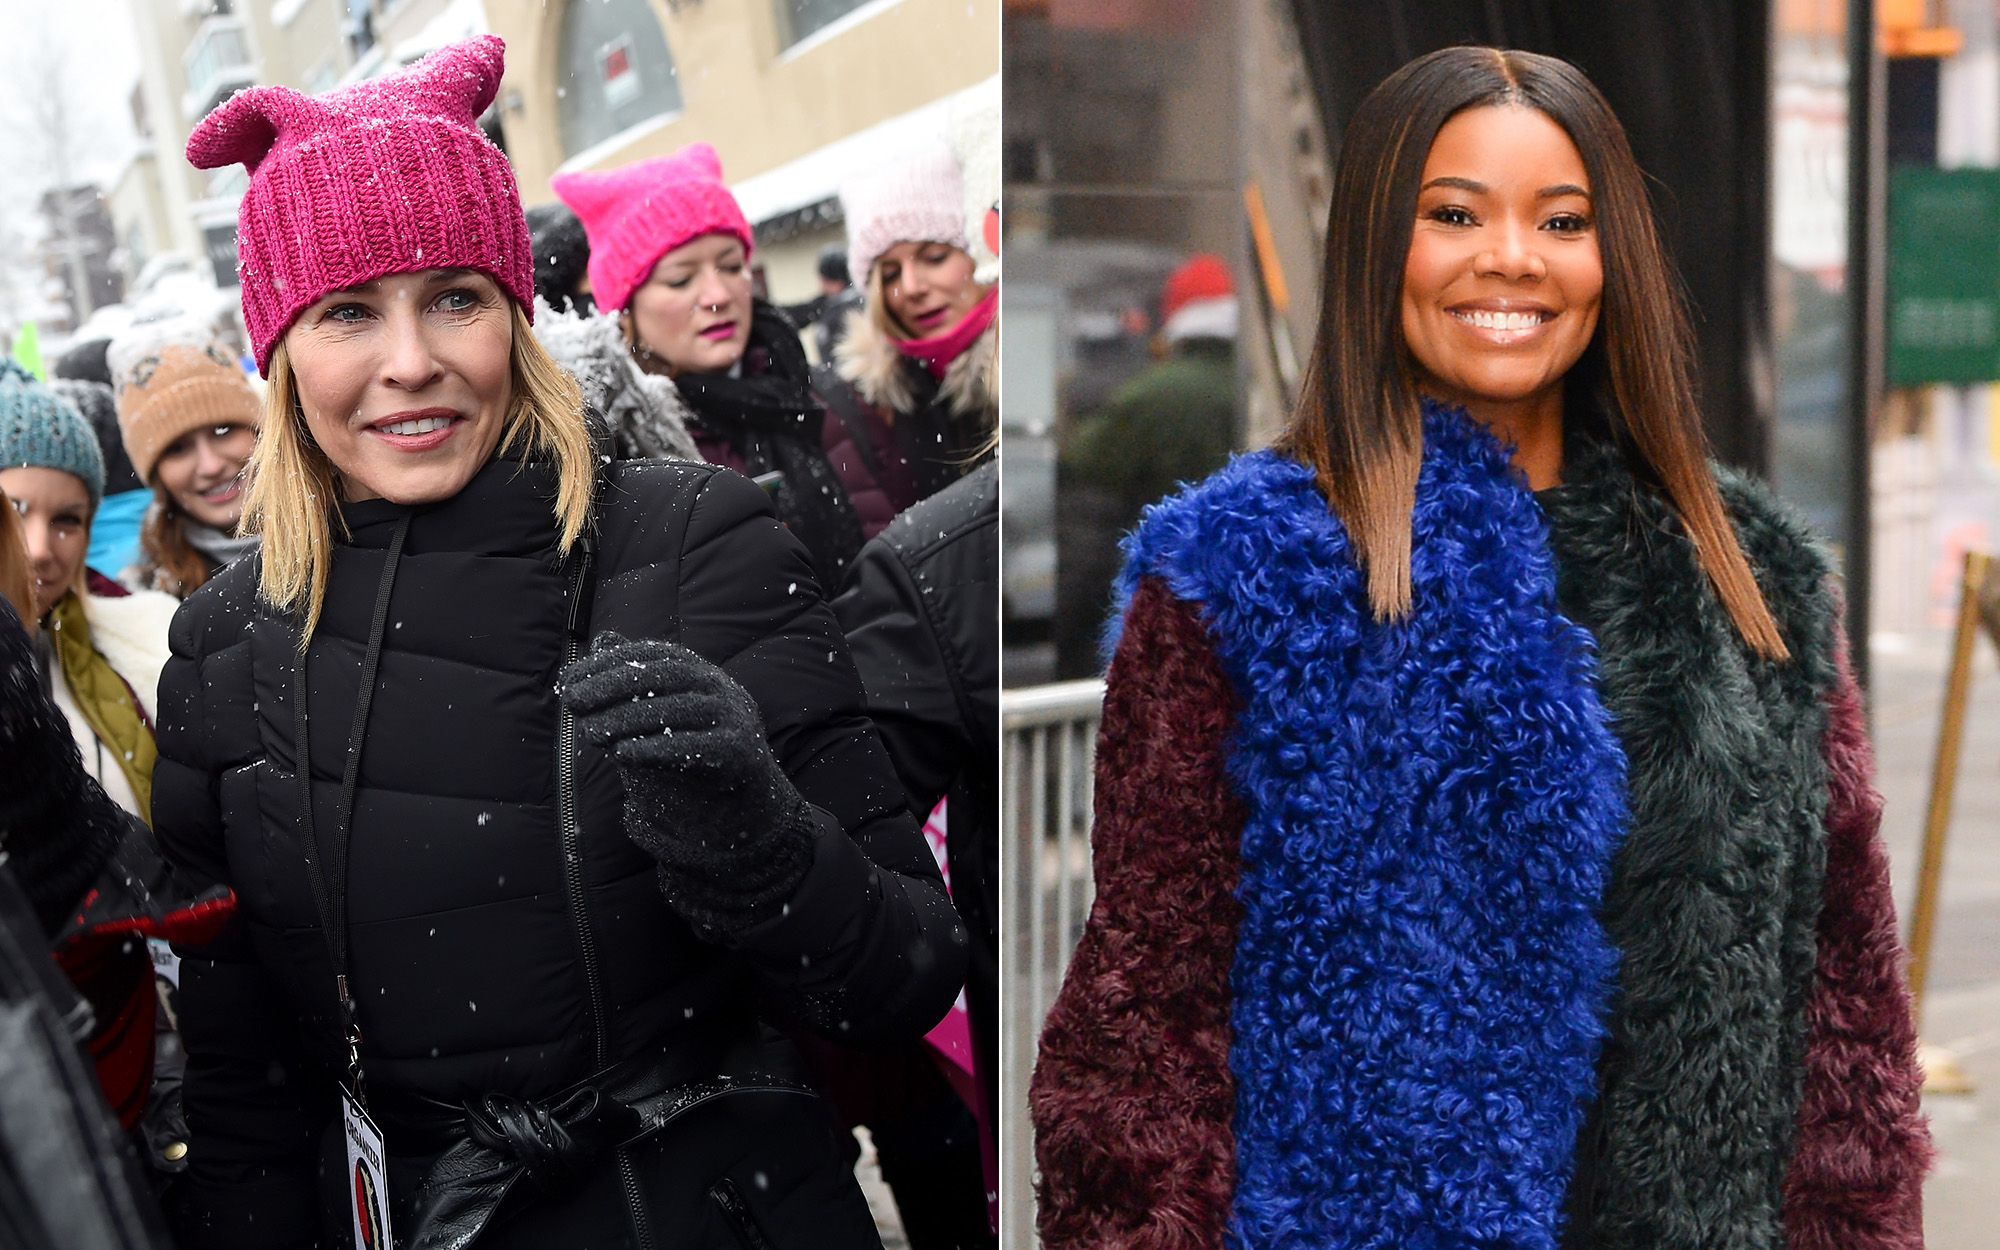 Chelsea Handler and Gabrielle Union